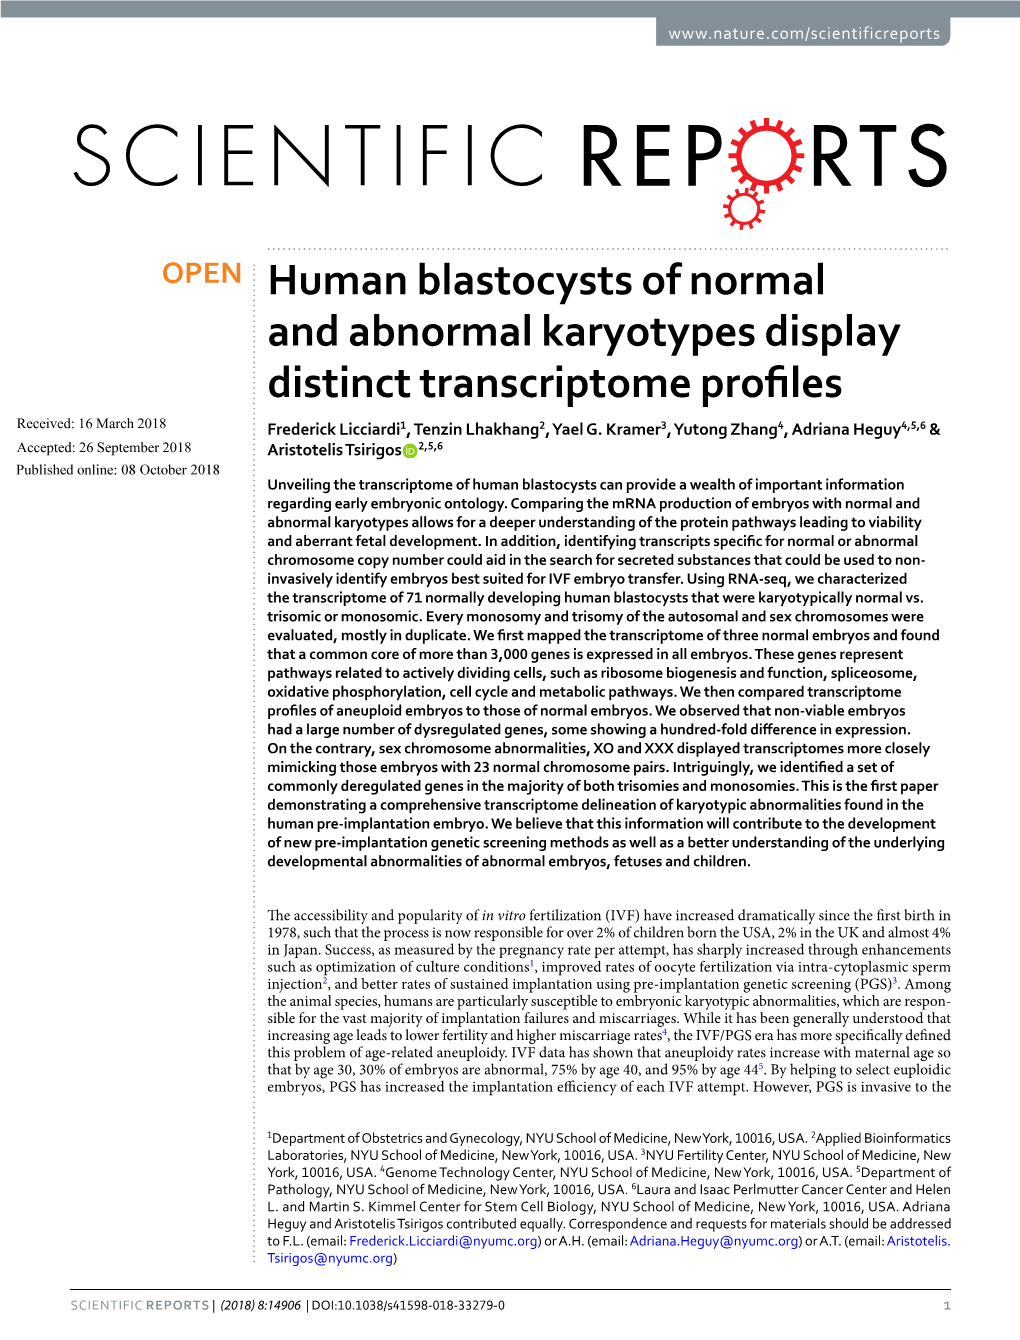 Human Blastocysts of Normal and Abnormal Karyotypes Display Distinct Transcriptome Profles Received: 16 March 2018 Frederick Licciardi1, Tenzin Lhakhang2, Yael G